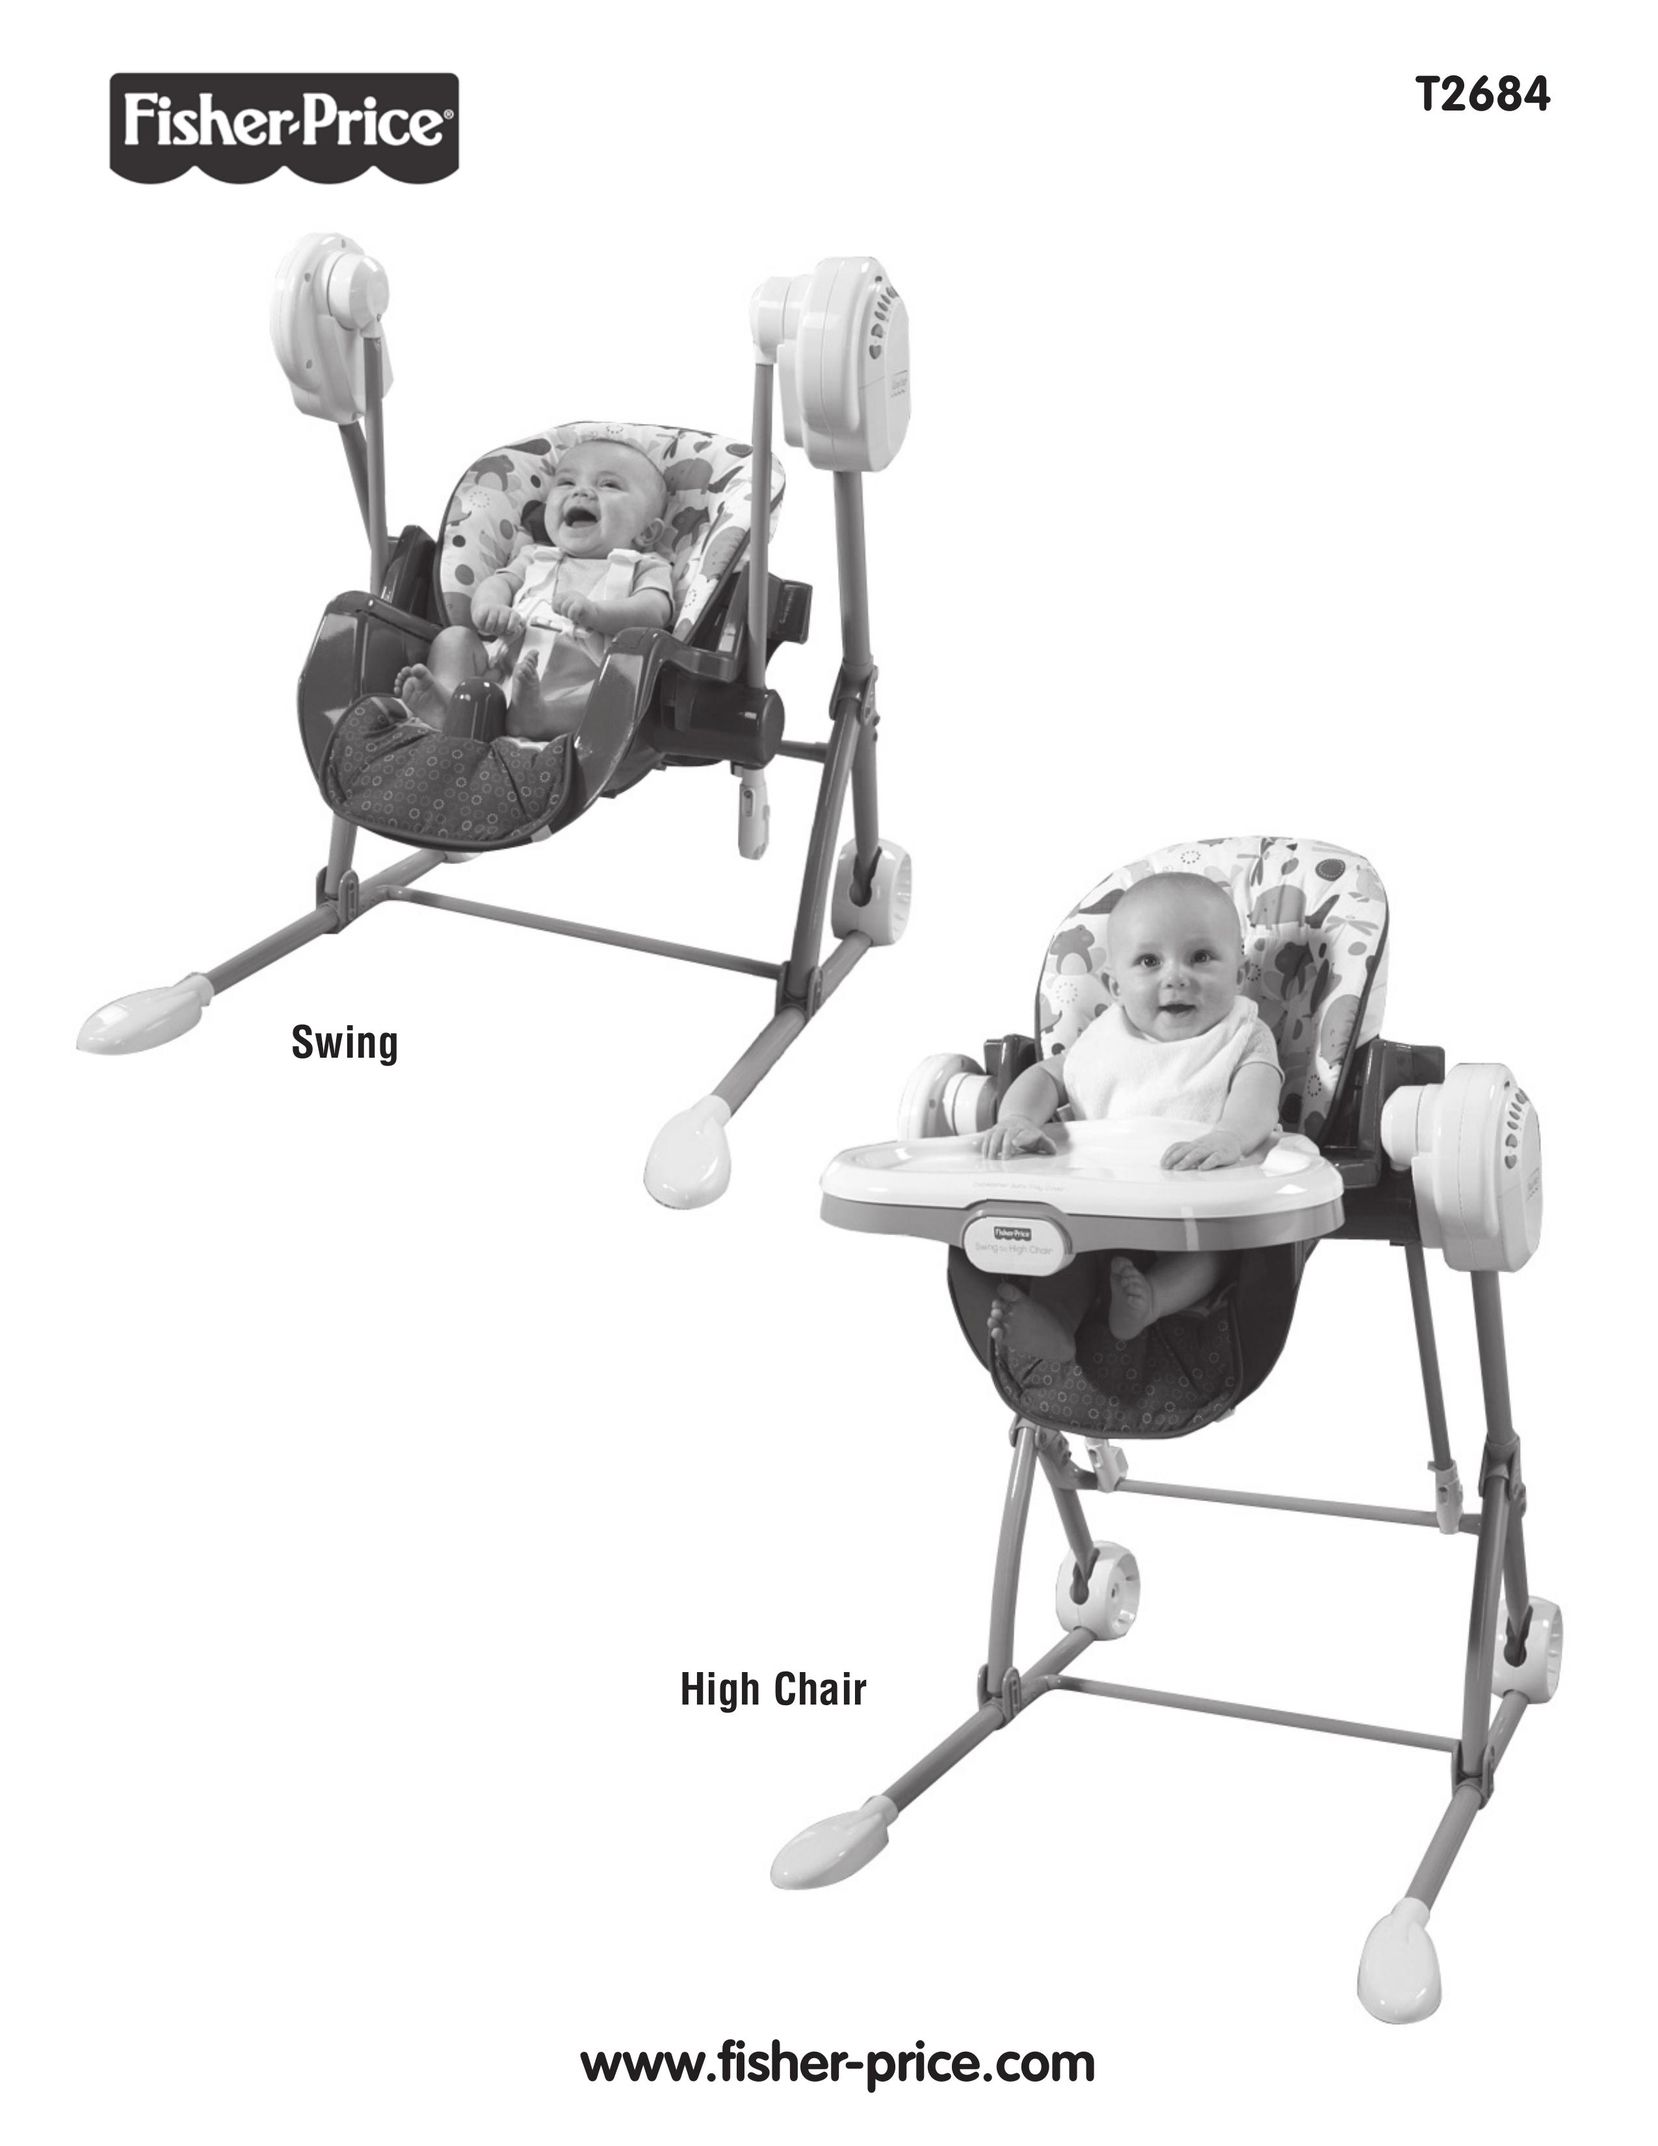 Fisher-Price T2684 High Chair User Manual